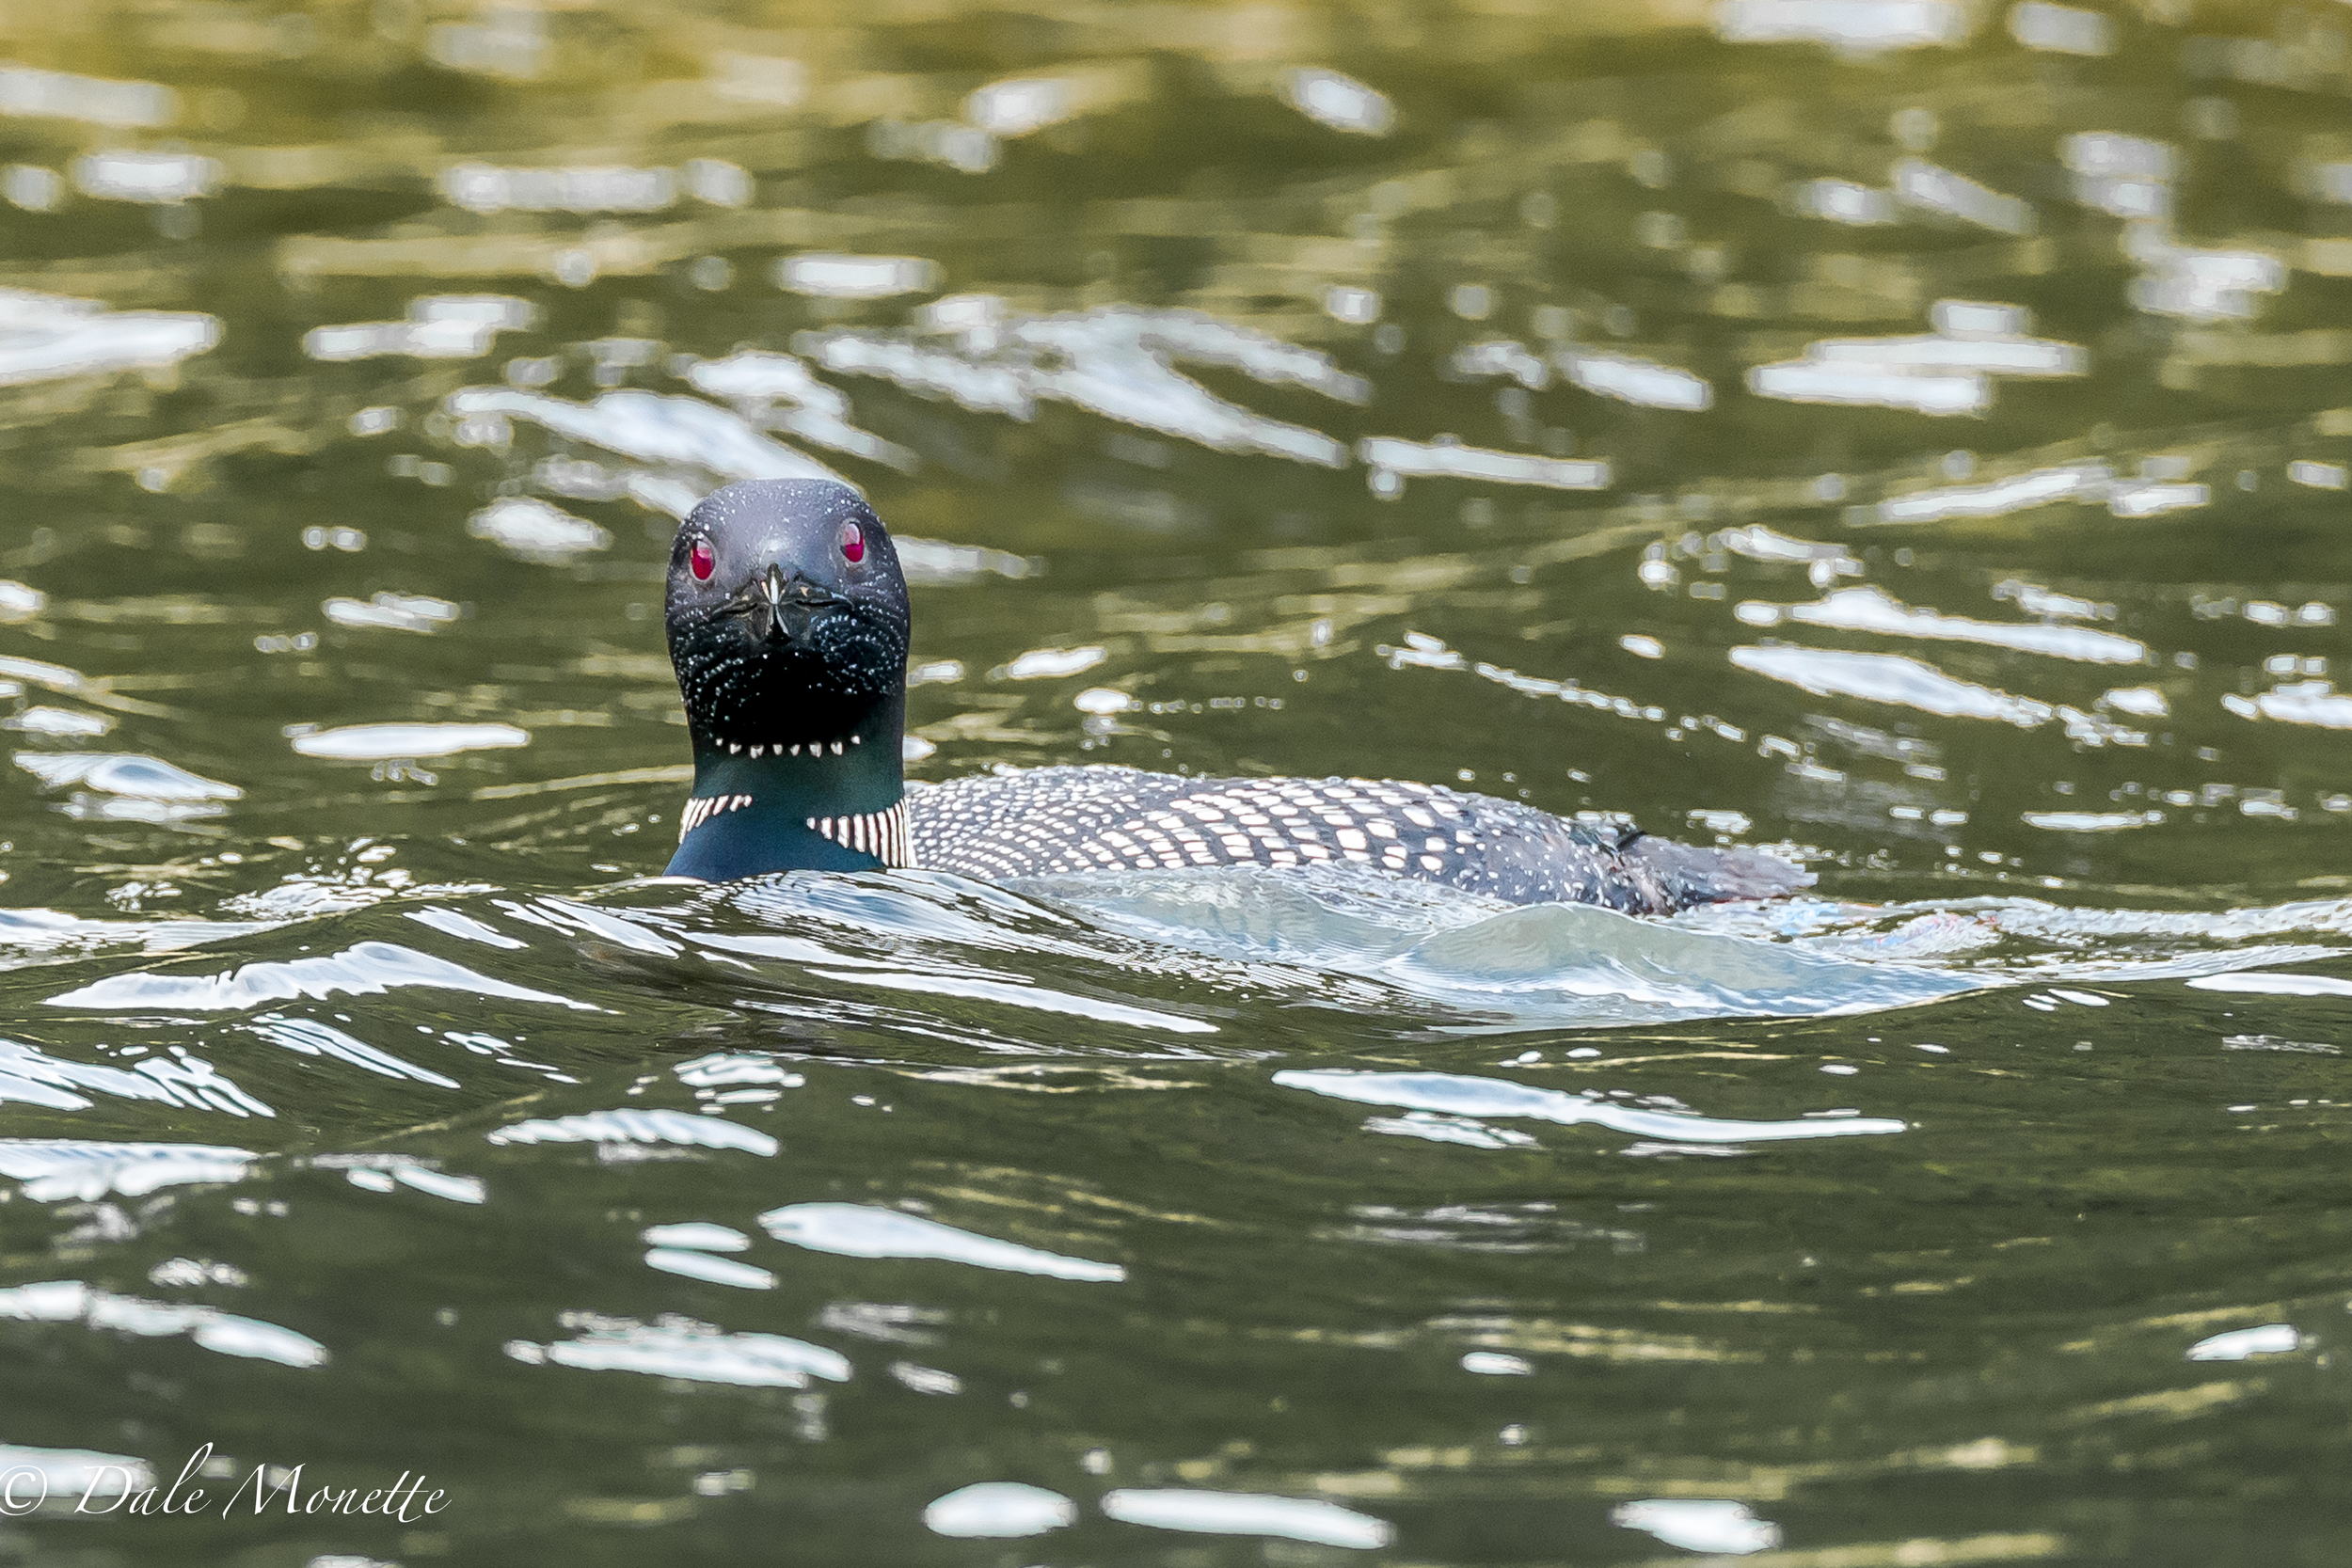    Here's a shot of a common loon taken today on the Quabbin Reservoir. Most shots I see are all side shots of loons. Here's one you don't see to often. &nbsp;8/17/18   